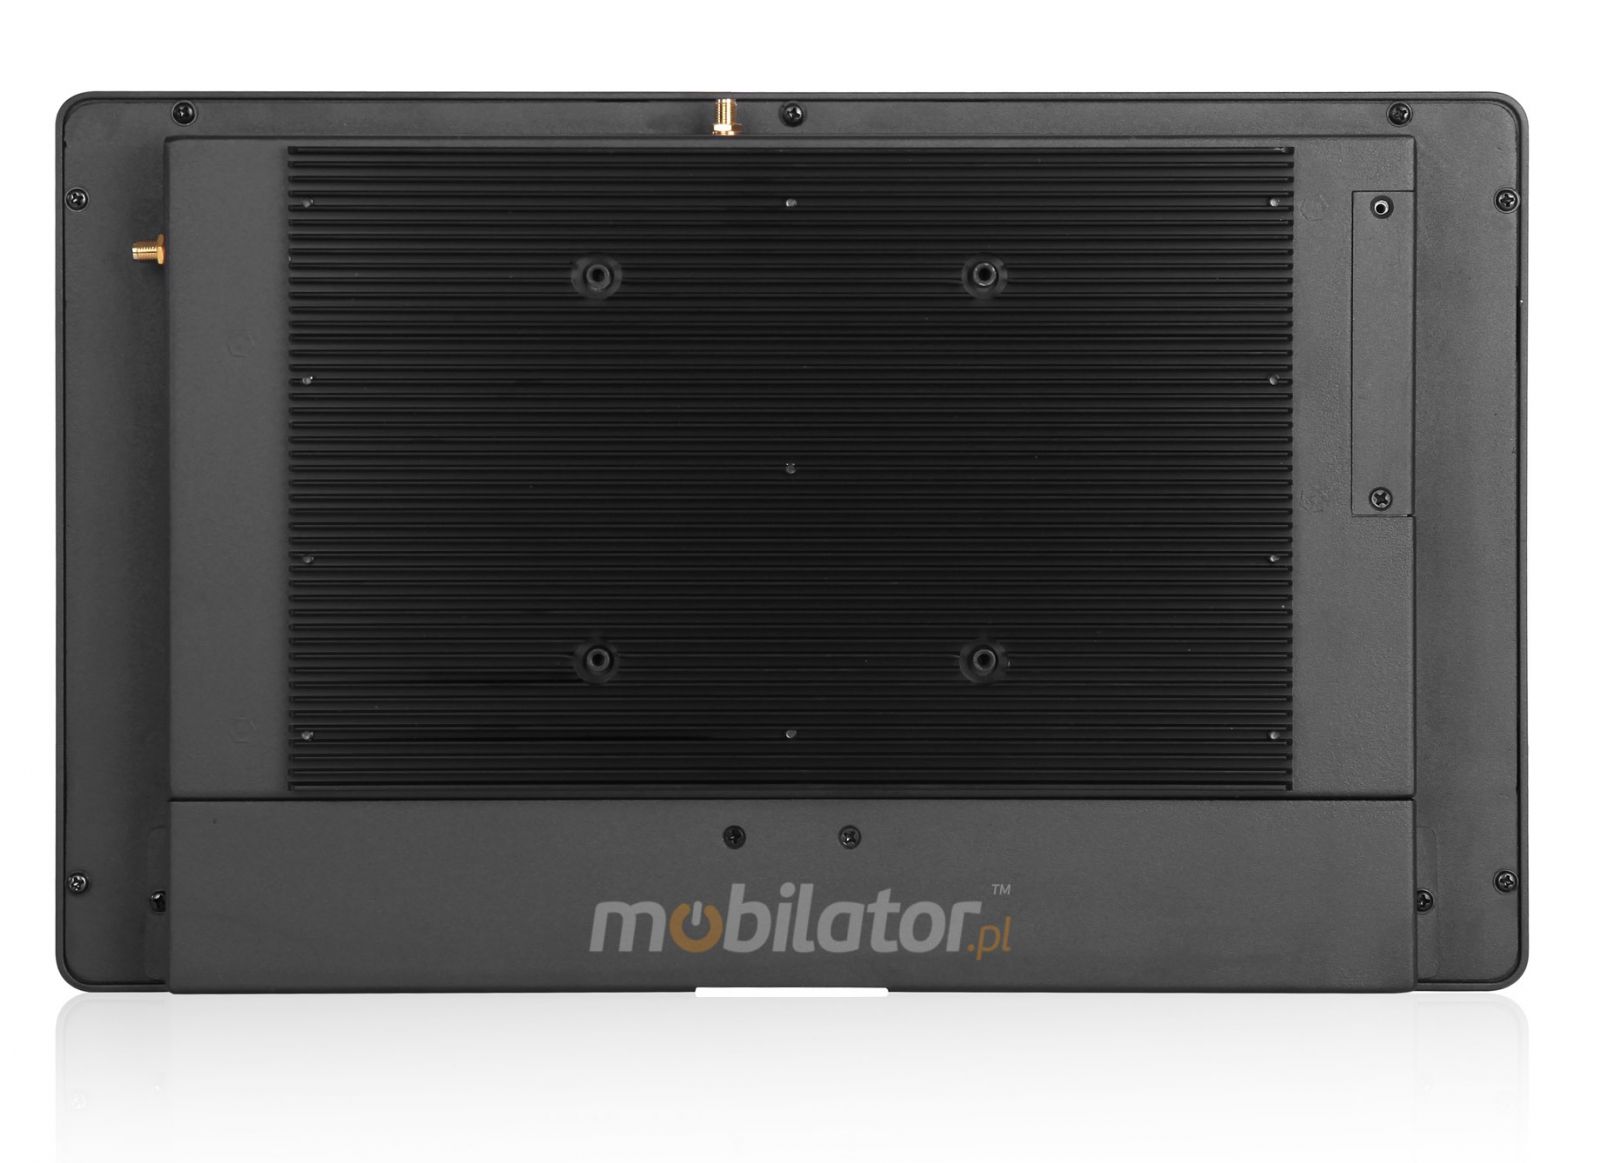 Mobilator Flat Design PCAP Fanless Touch PC, CTPC156RD3 IP 65 10 points touch screen, built-in WIFI, 12V DC input